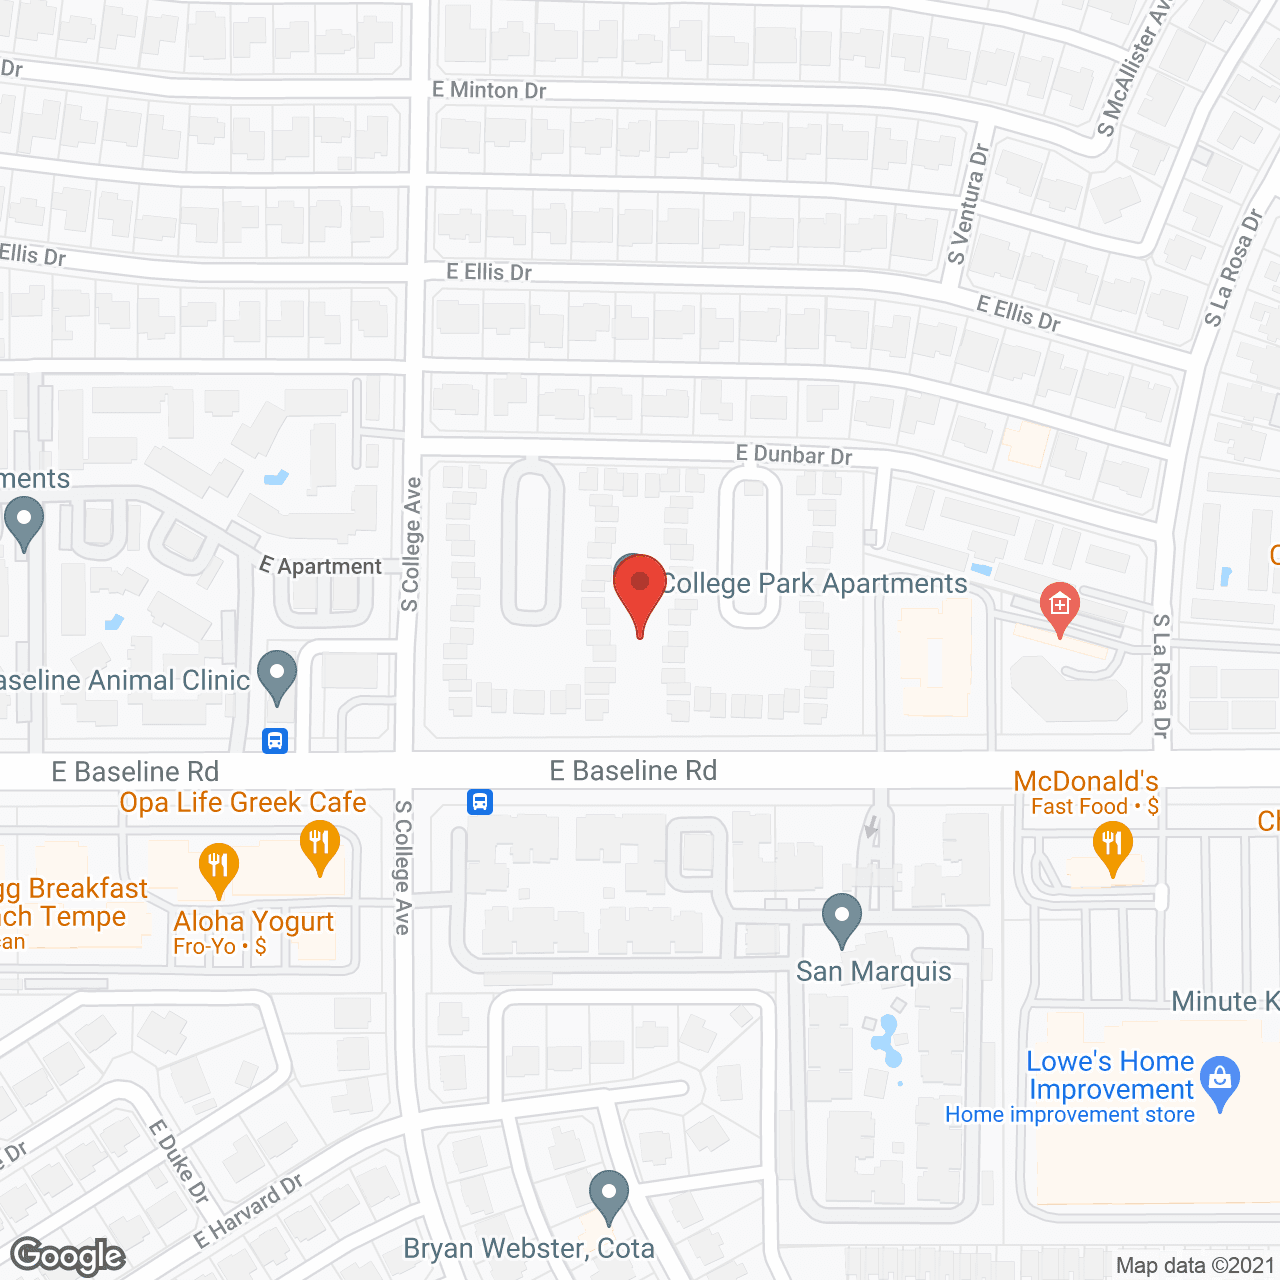 College Park Apartments in google map